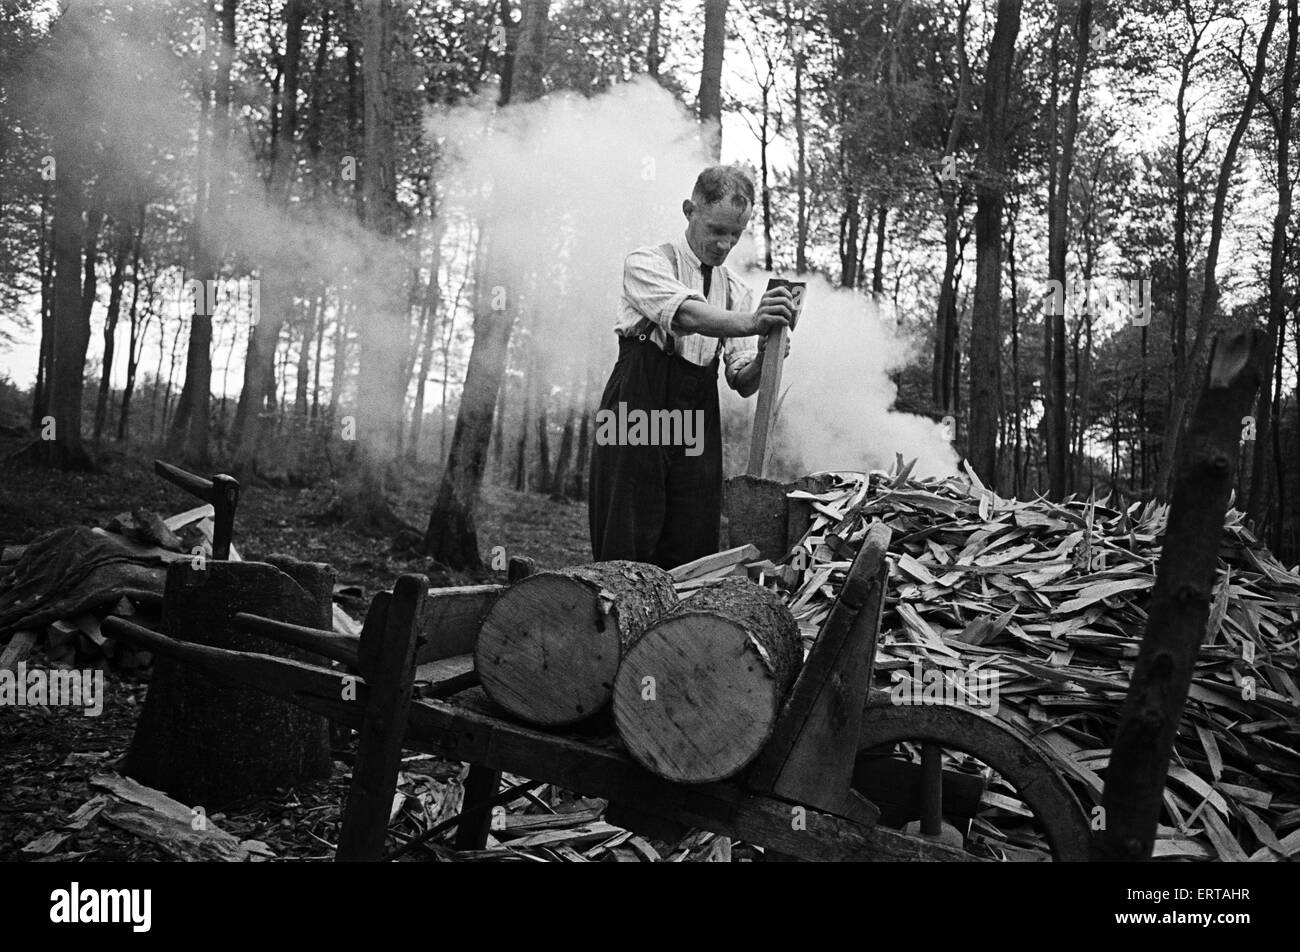 Chair bodgers working in West Wycombe, Buckinghamshire. Bodging is a traditional wood-turning craft used to make chair legs and other cylindrical parts of chairs. Circa 1945. Stock Photo